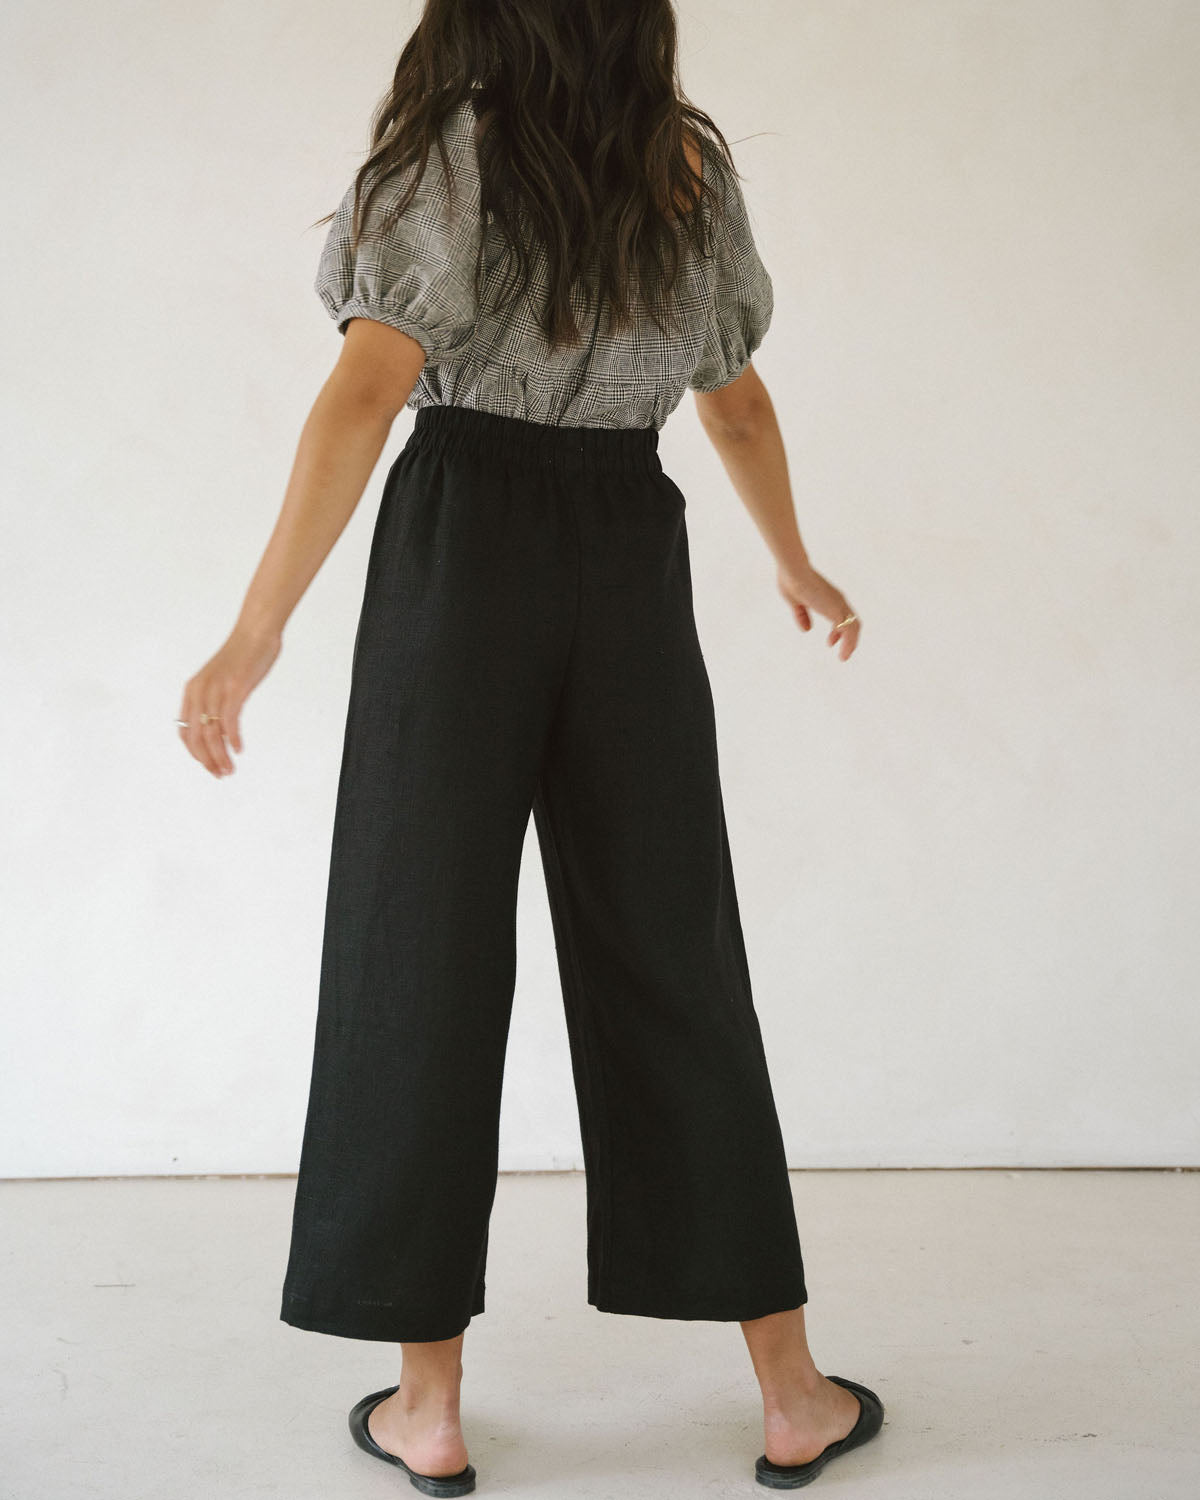 black cropped wide leg pants with elastic waistband